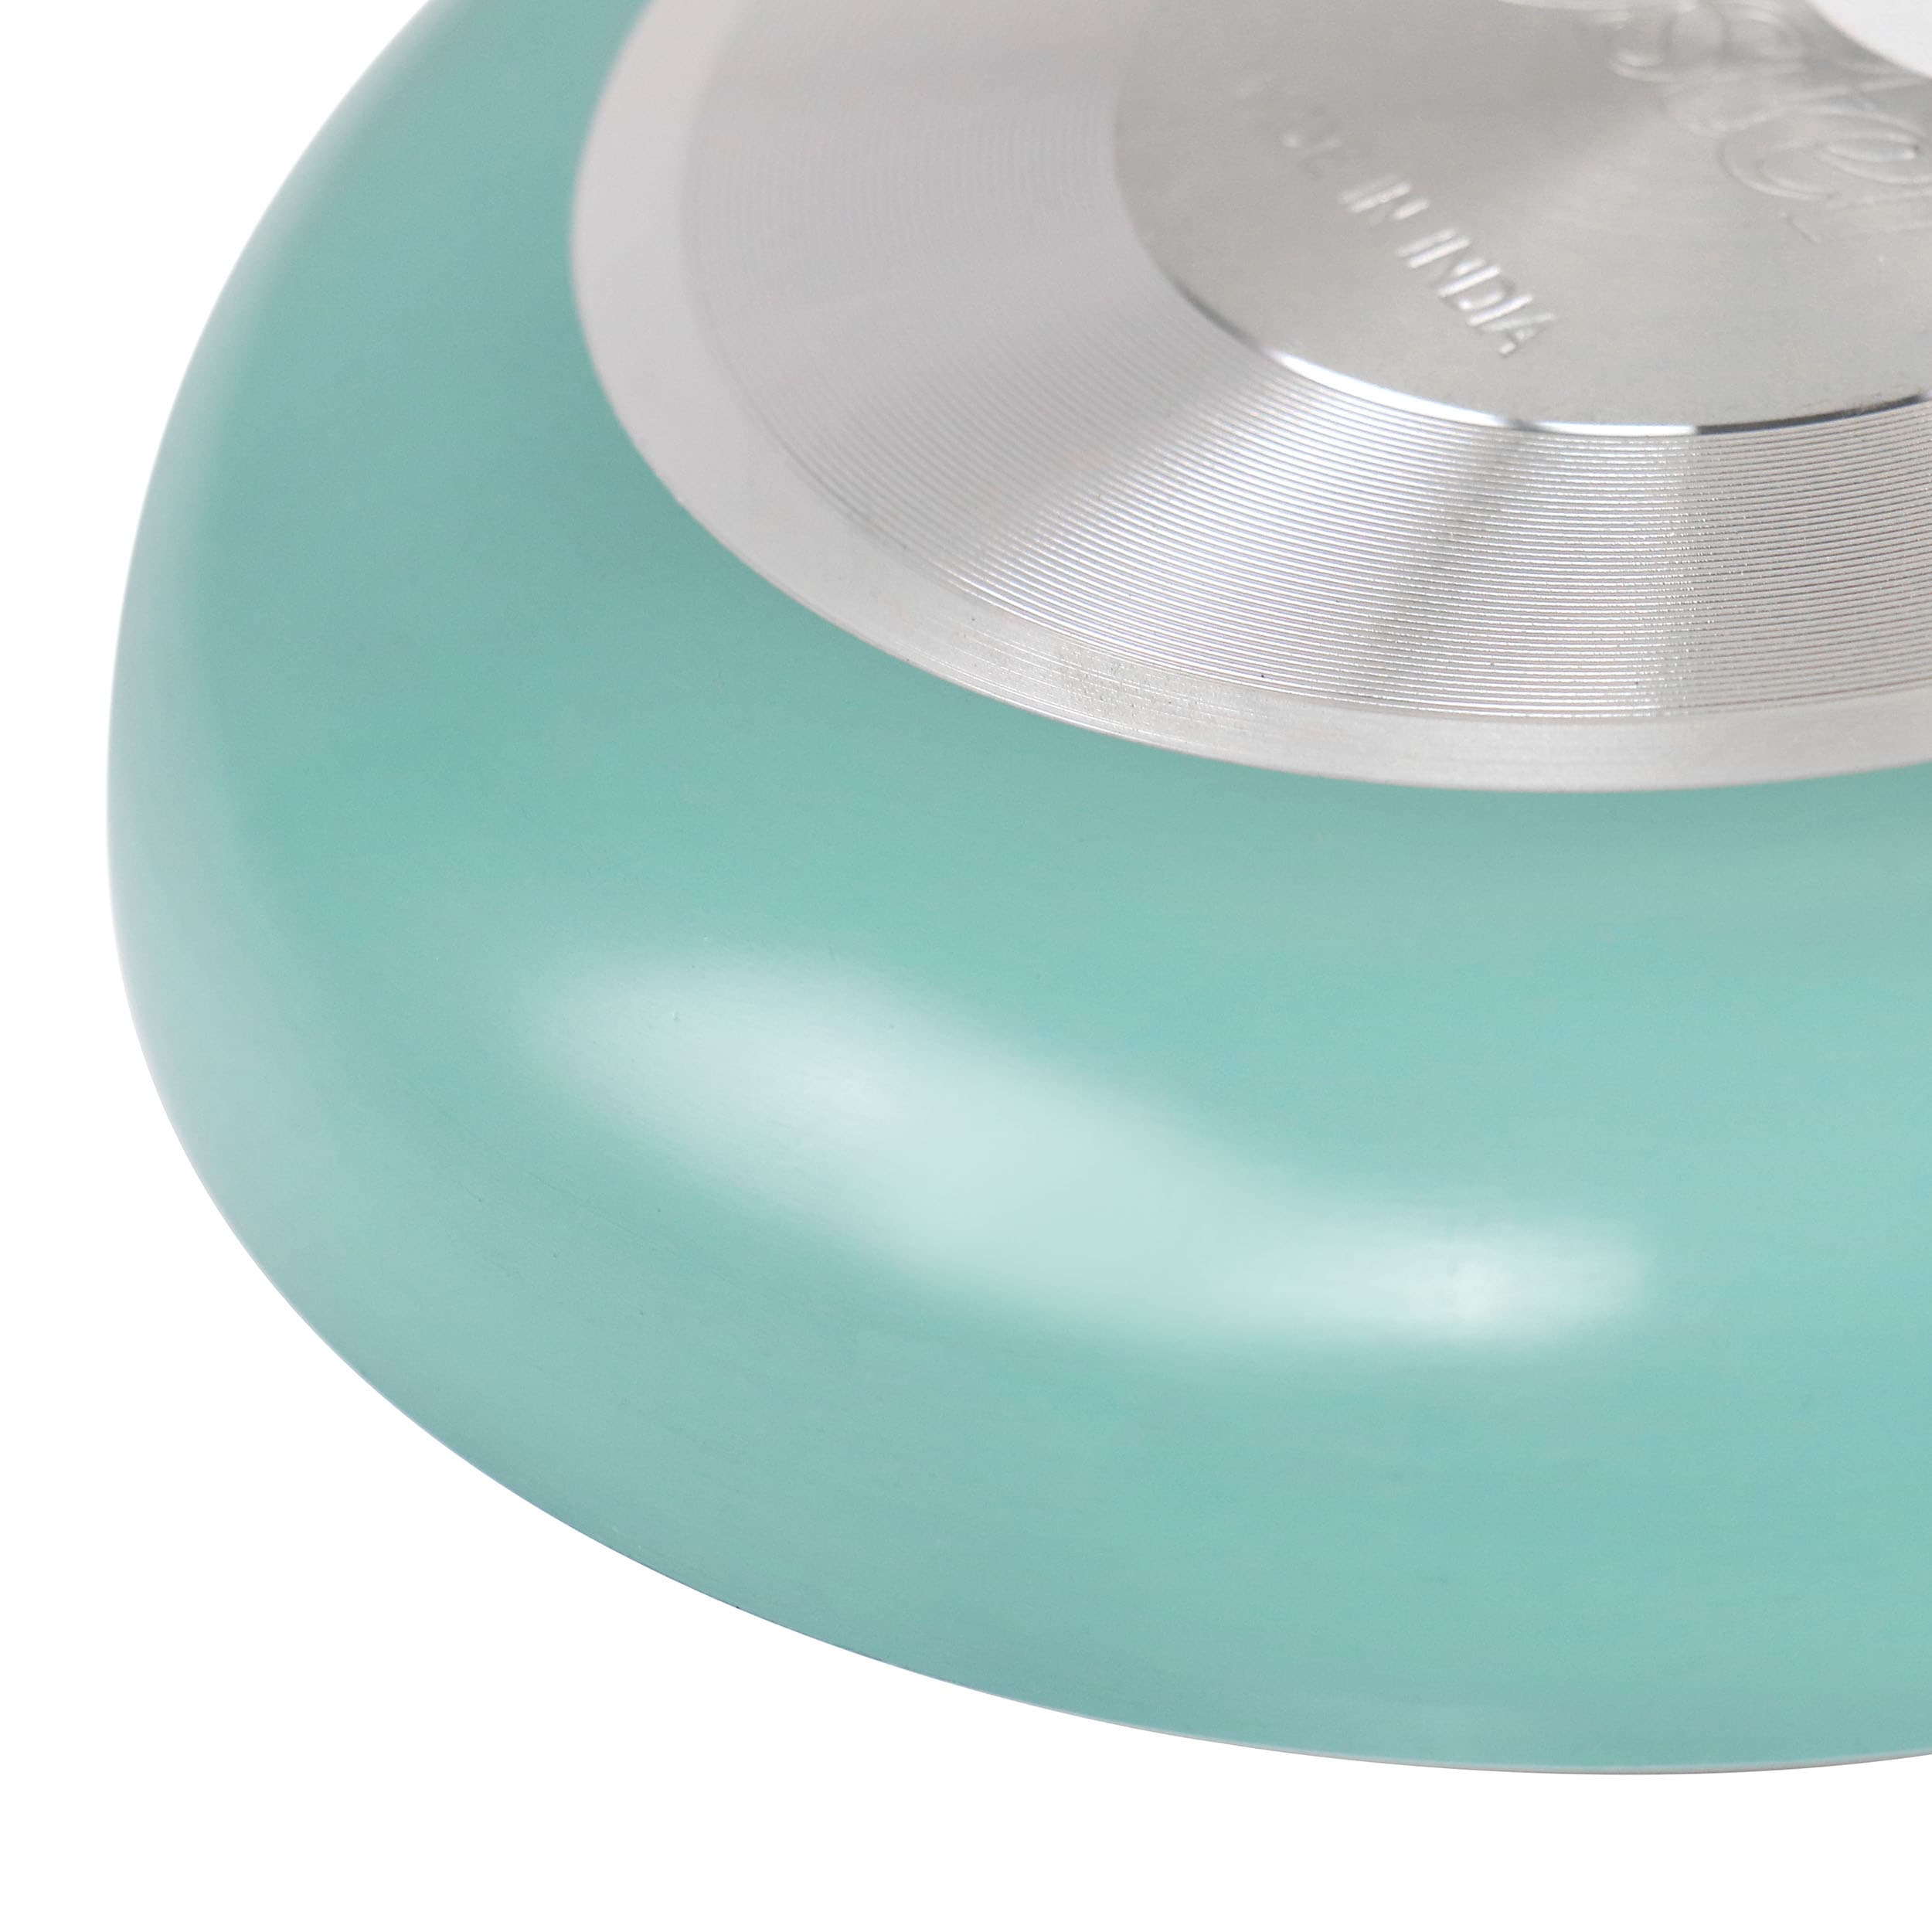 https://ak1.ostkcdn.com/images/products/is/images/direct/0c621823d69efd67853b224bbd4c212eecc8e3ef/8-in.-Nonstick-Aluminum-Frying-Pan-in-Turquoise.jpg